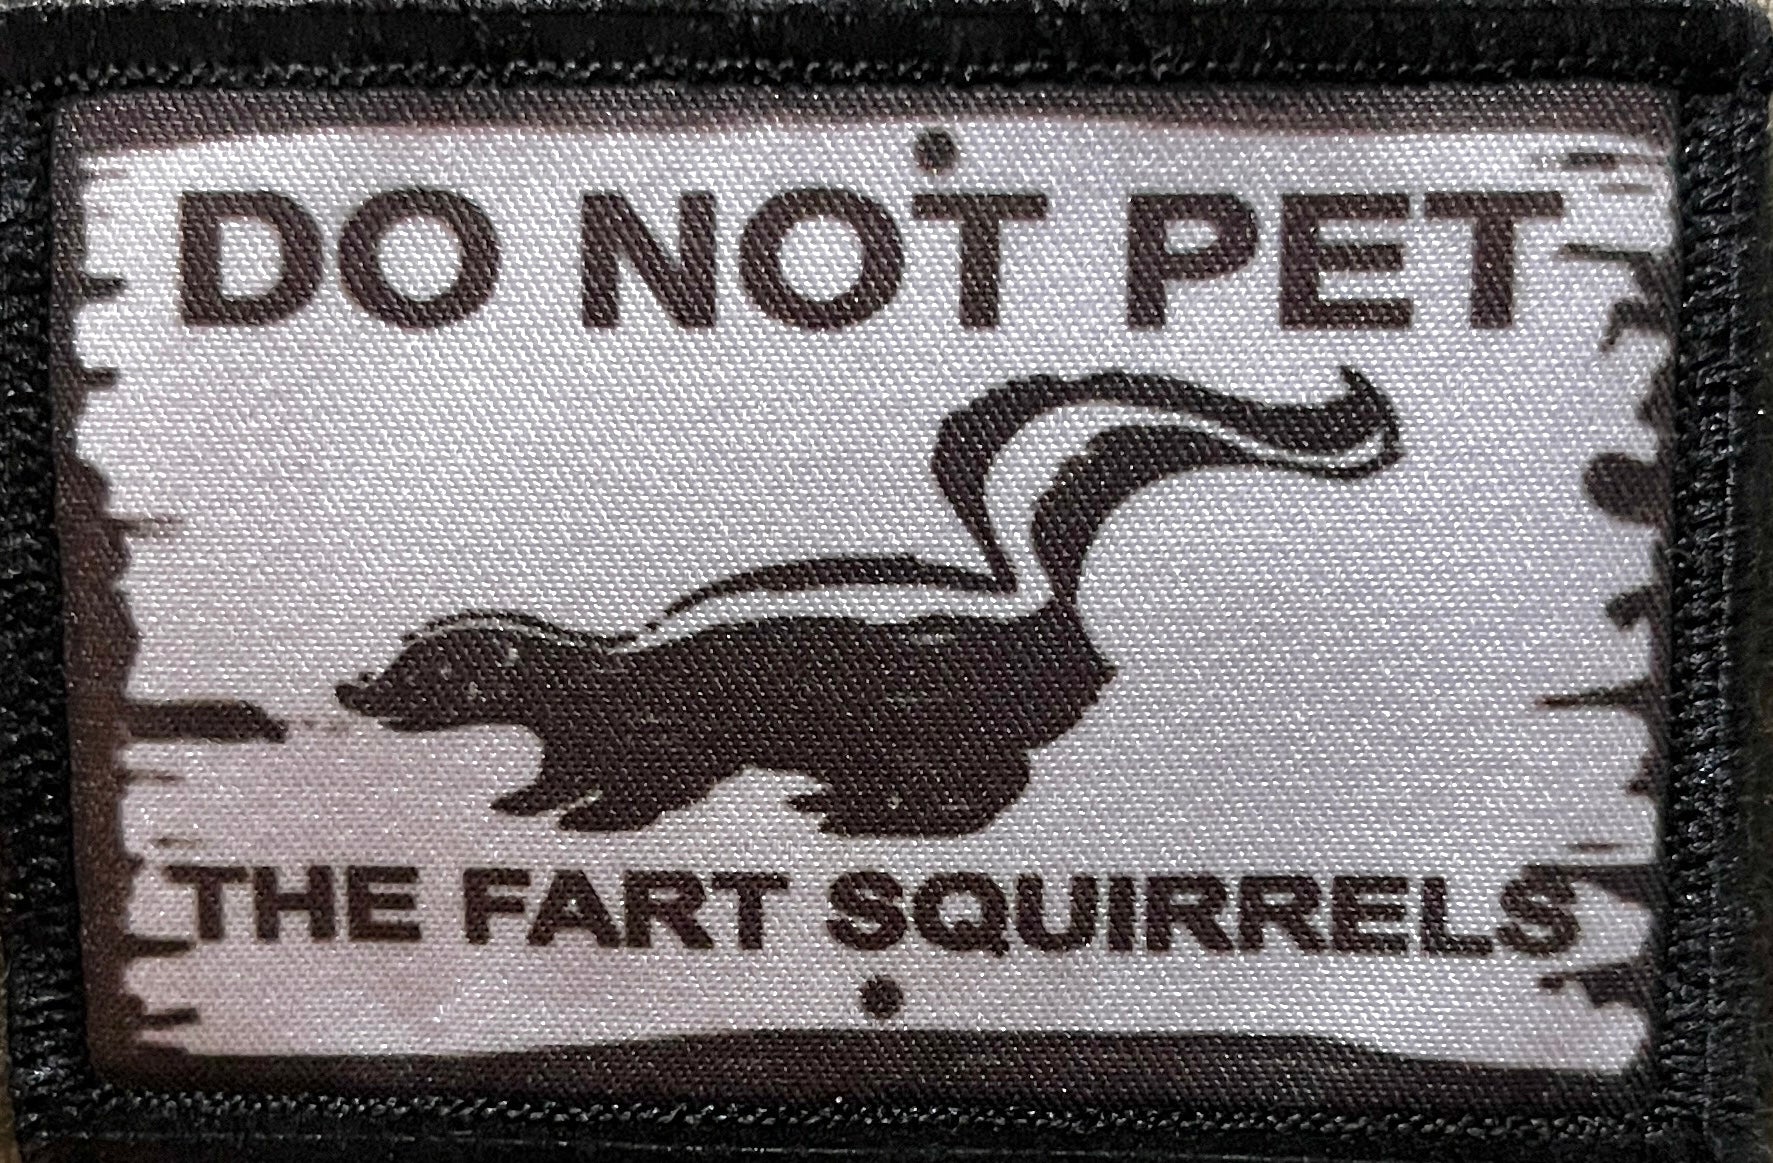 Do Not Pet The Fart Squirrels Morale Patch Morale Patches Redheaded T Shirts 